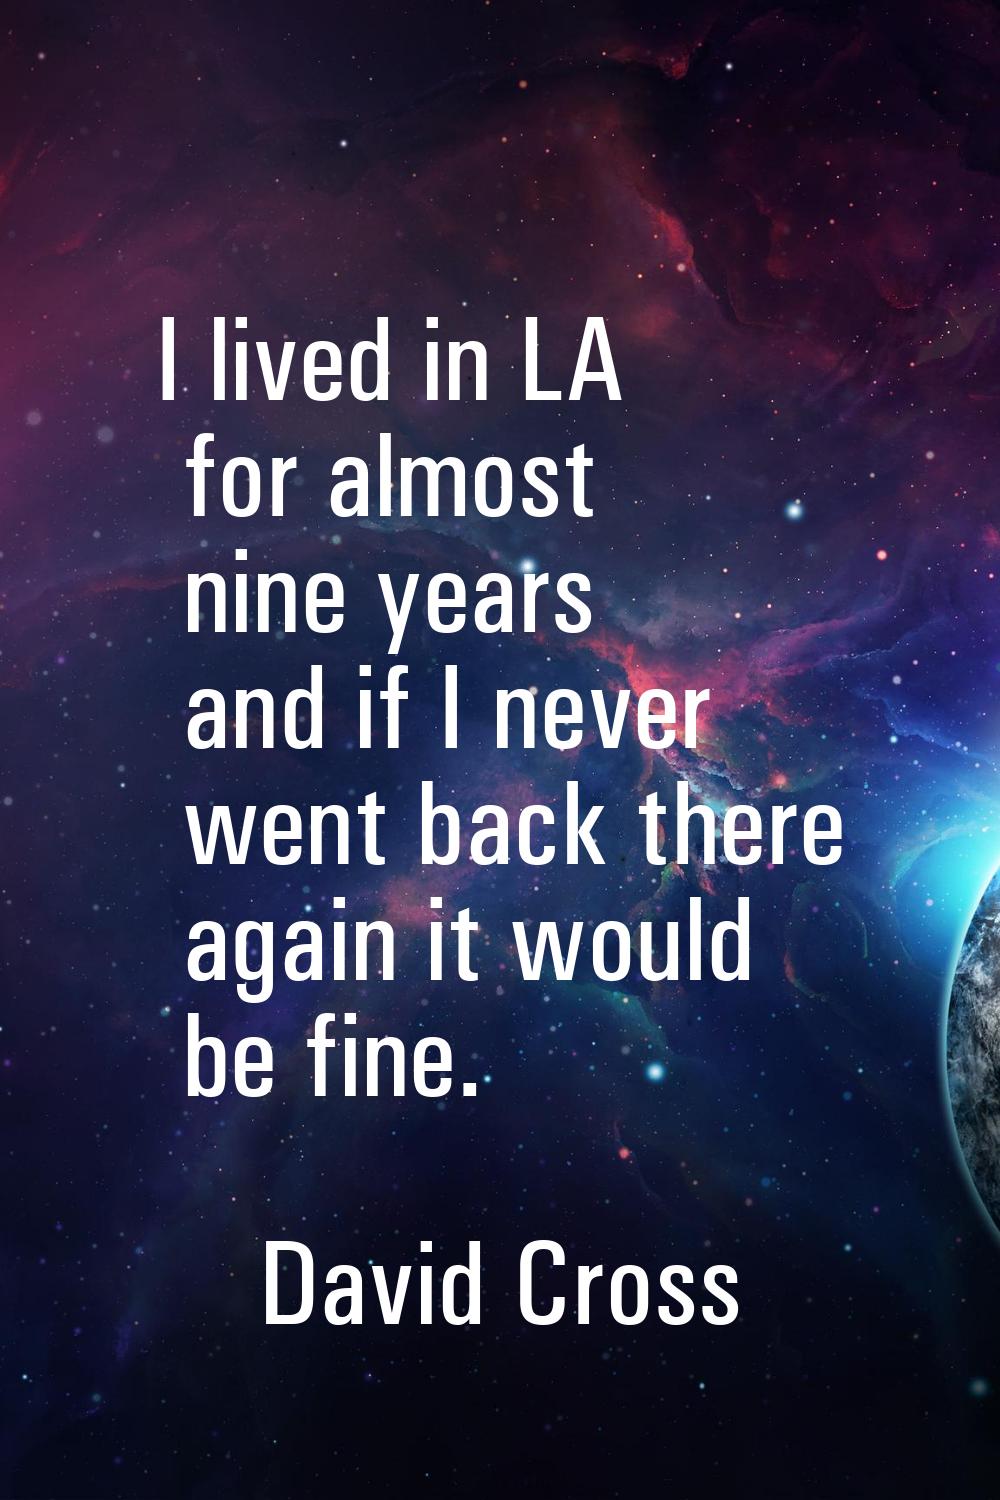 I lived in LA for almost nine years and if I never went back there again it would be fine.